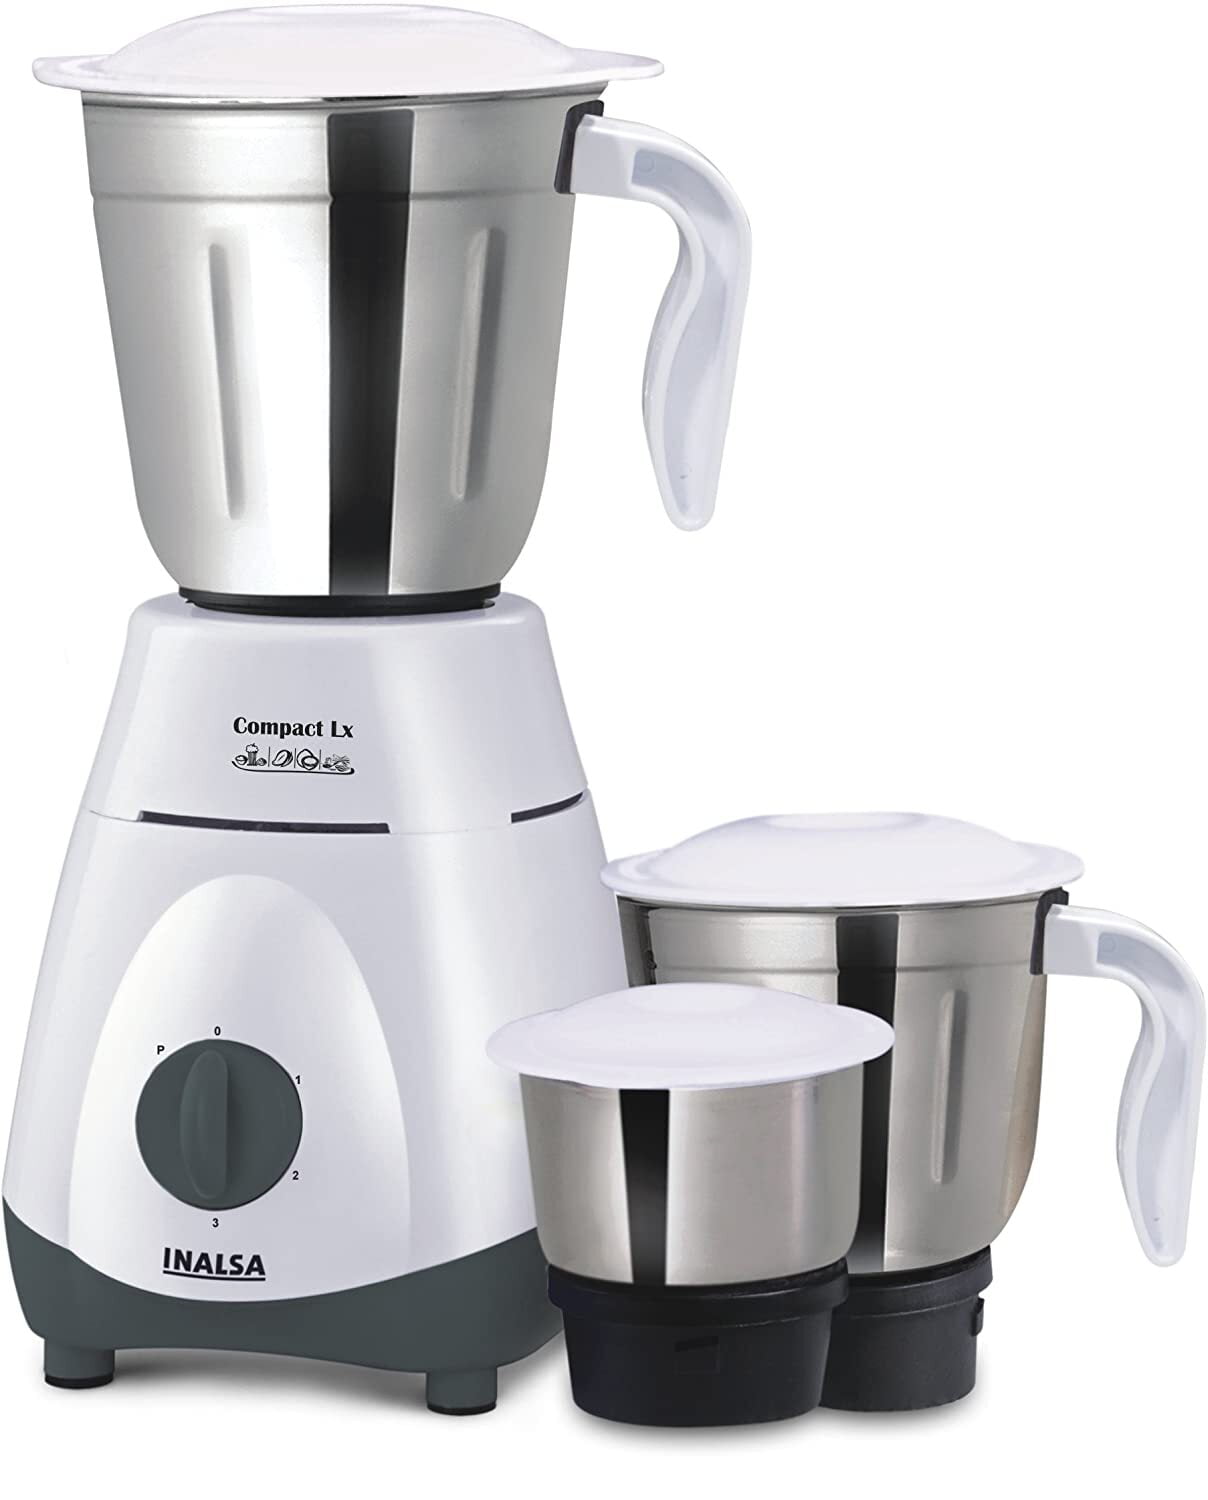 Inalsa Compact LX On Dillimall.Com